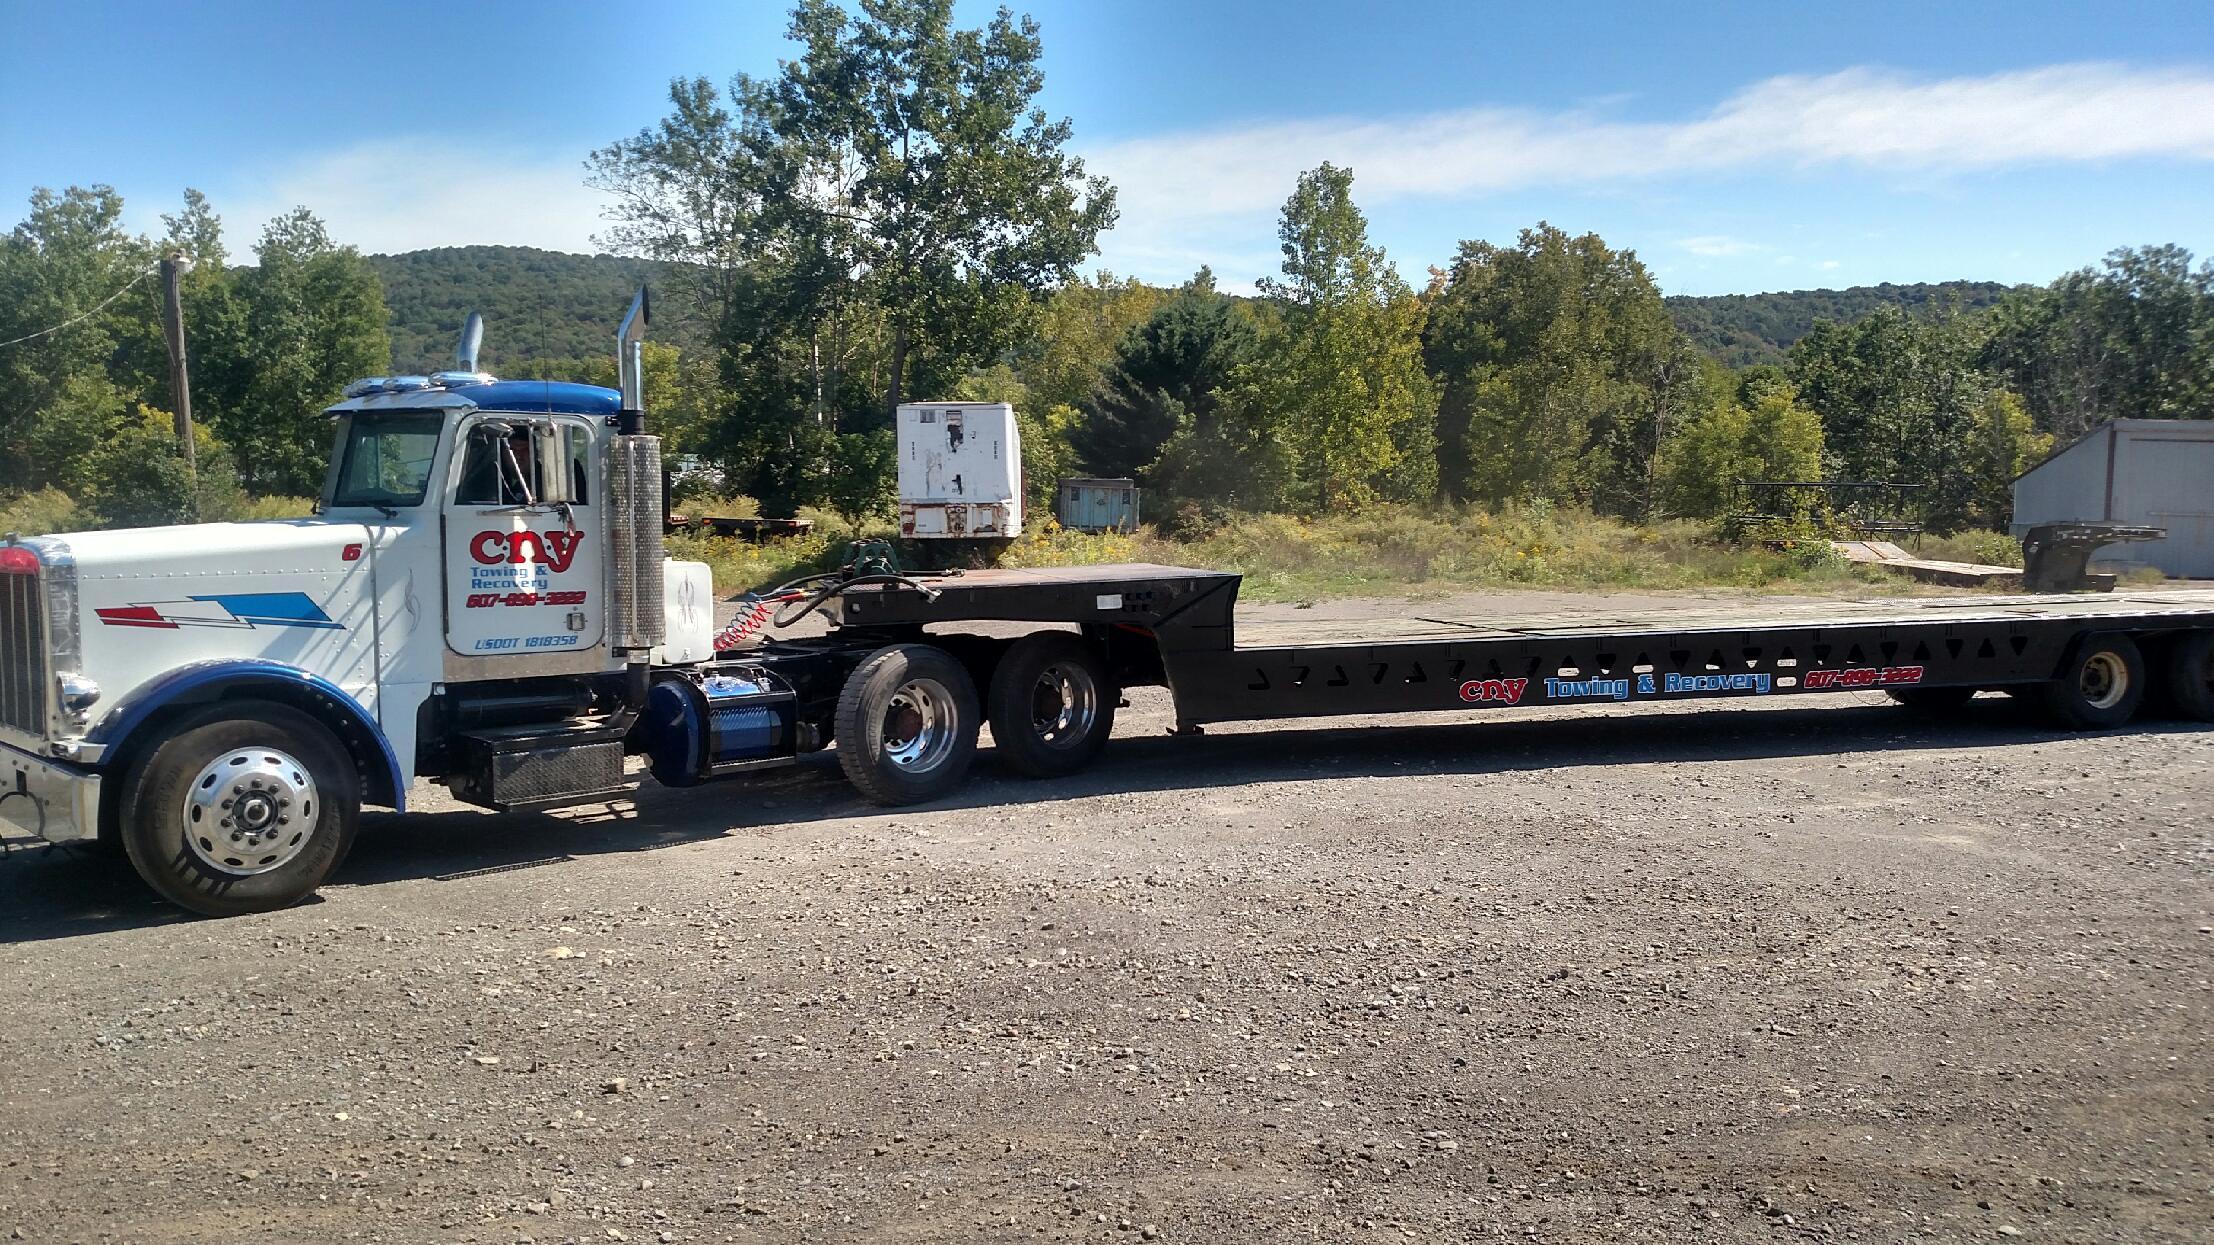 CNY Towing & Recovery is Cortland's trusted provider for light, medium, and heavy duty towing. If you find yourself stranded on the side of the road or stuck in a ditch call us immediately at 607-898-3222. Our tow truck operators are highly trained and certified to ensure your vehicle is in good hands. We treat your vehicle the way you treat it - with care and respect. 

For the most competitive rates for towing in the state call CNY Towing & Recovery. We always give our customers a realistic time of arrival and ETA. We will always be honest and fair with you. If you're in need of a jump start, tire change, battery change, fuel delivery, or winch out you can count on us. We are capable of towing everything from your personal compact vehicle to semis and RV's. We will get you back on the road in no time!

Our well maintained fleet of wreckers, flat beds, military trucks, and standard light duty recovery vehicles can handle any job big or small. Call us today at 607-898-3222.